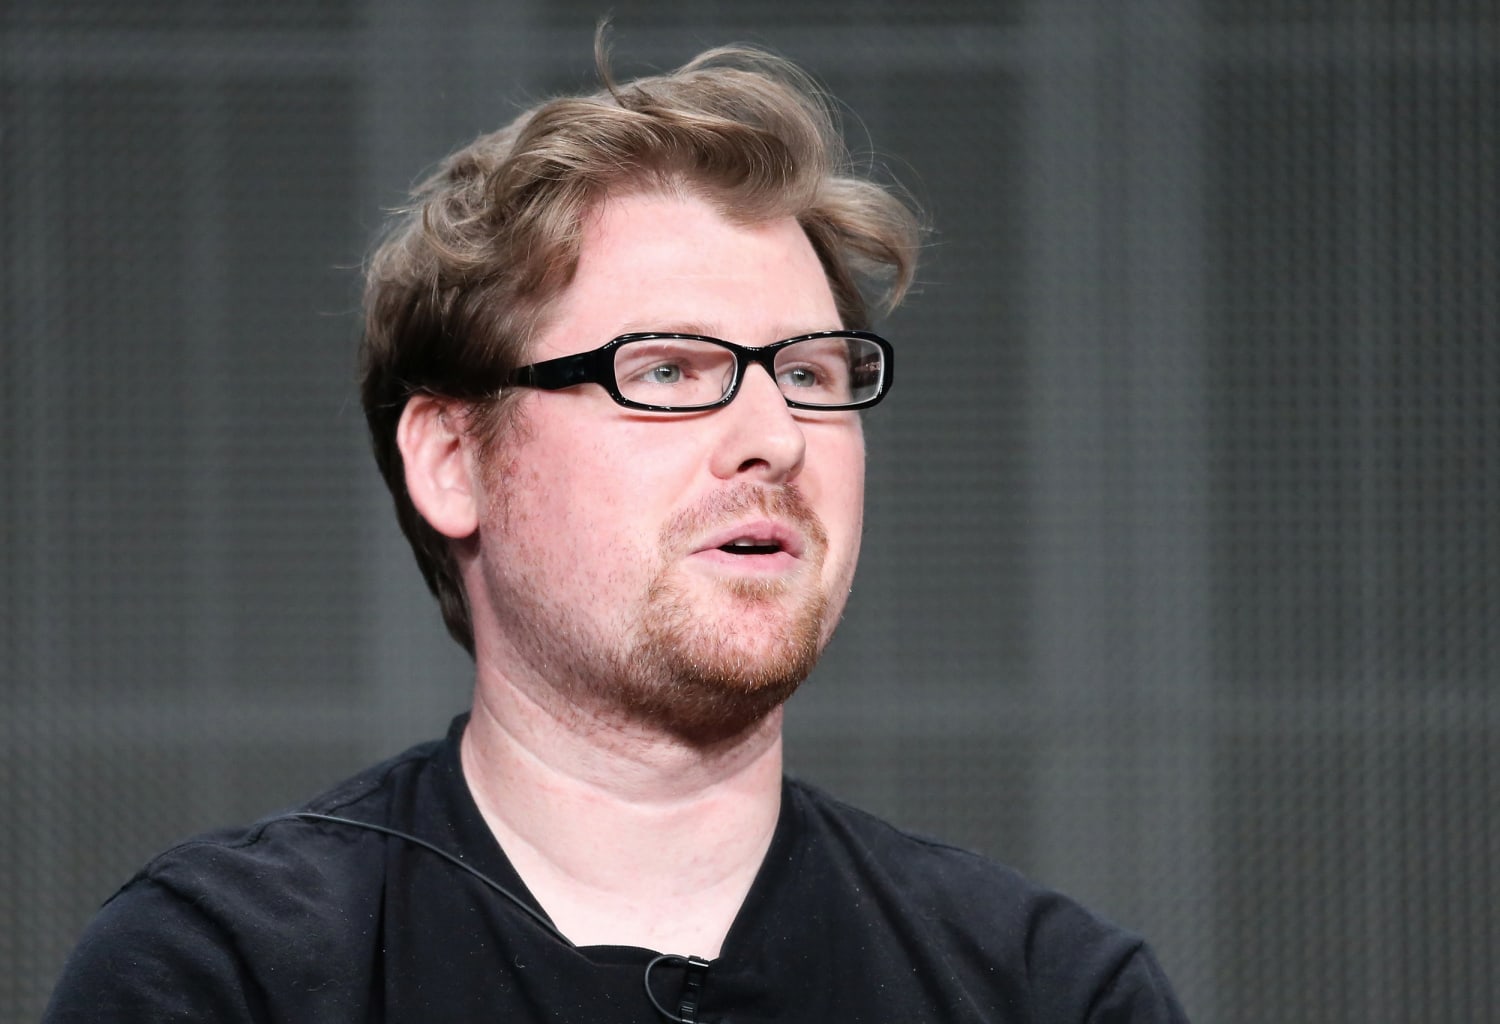 Hulu cuts ties with 'Rick and Morty' co-creator Justin Roiland after domestic violence charges